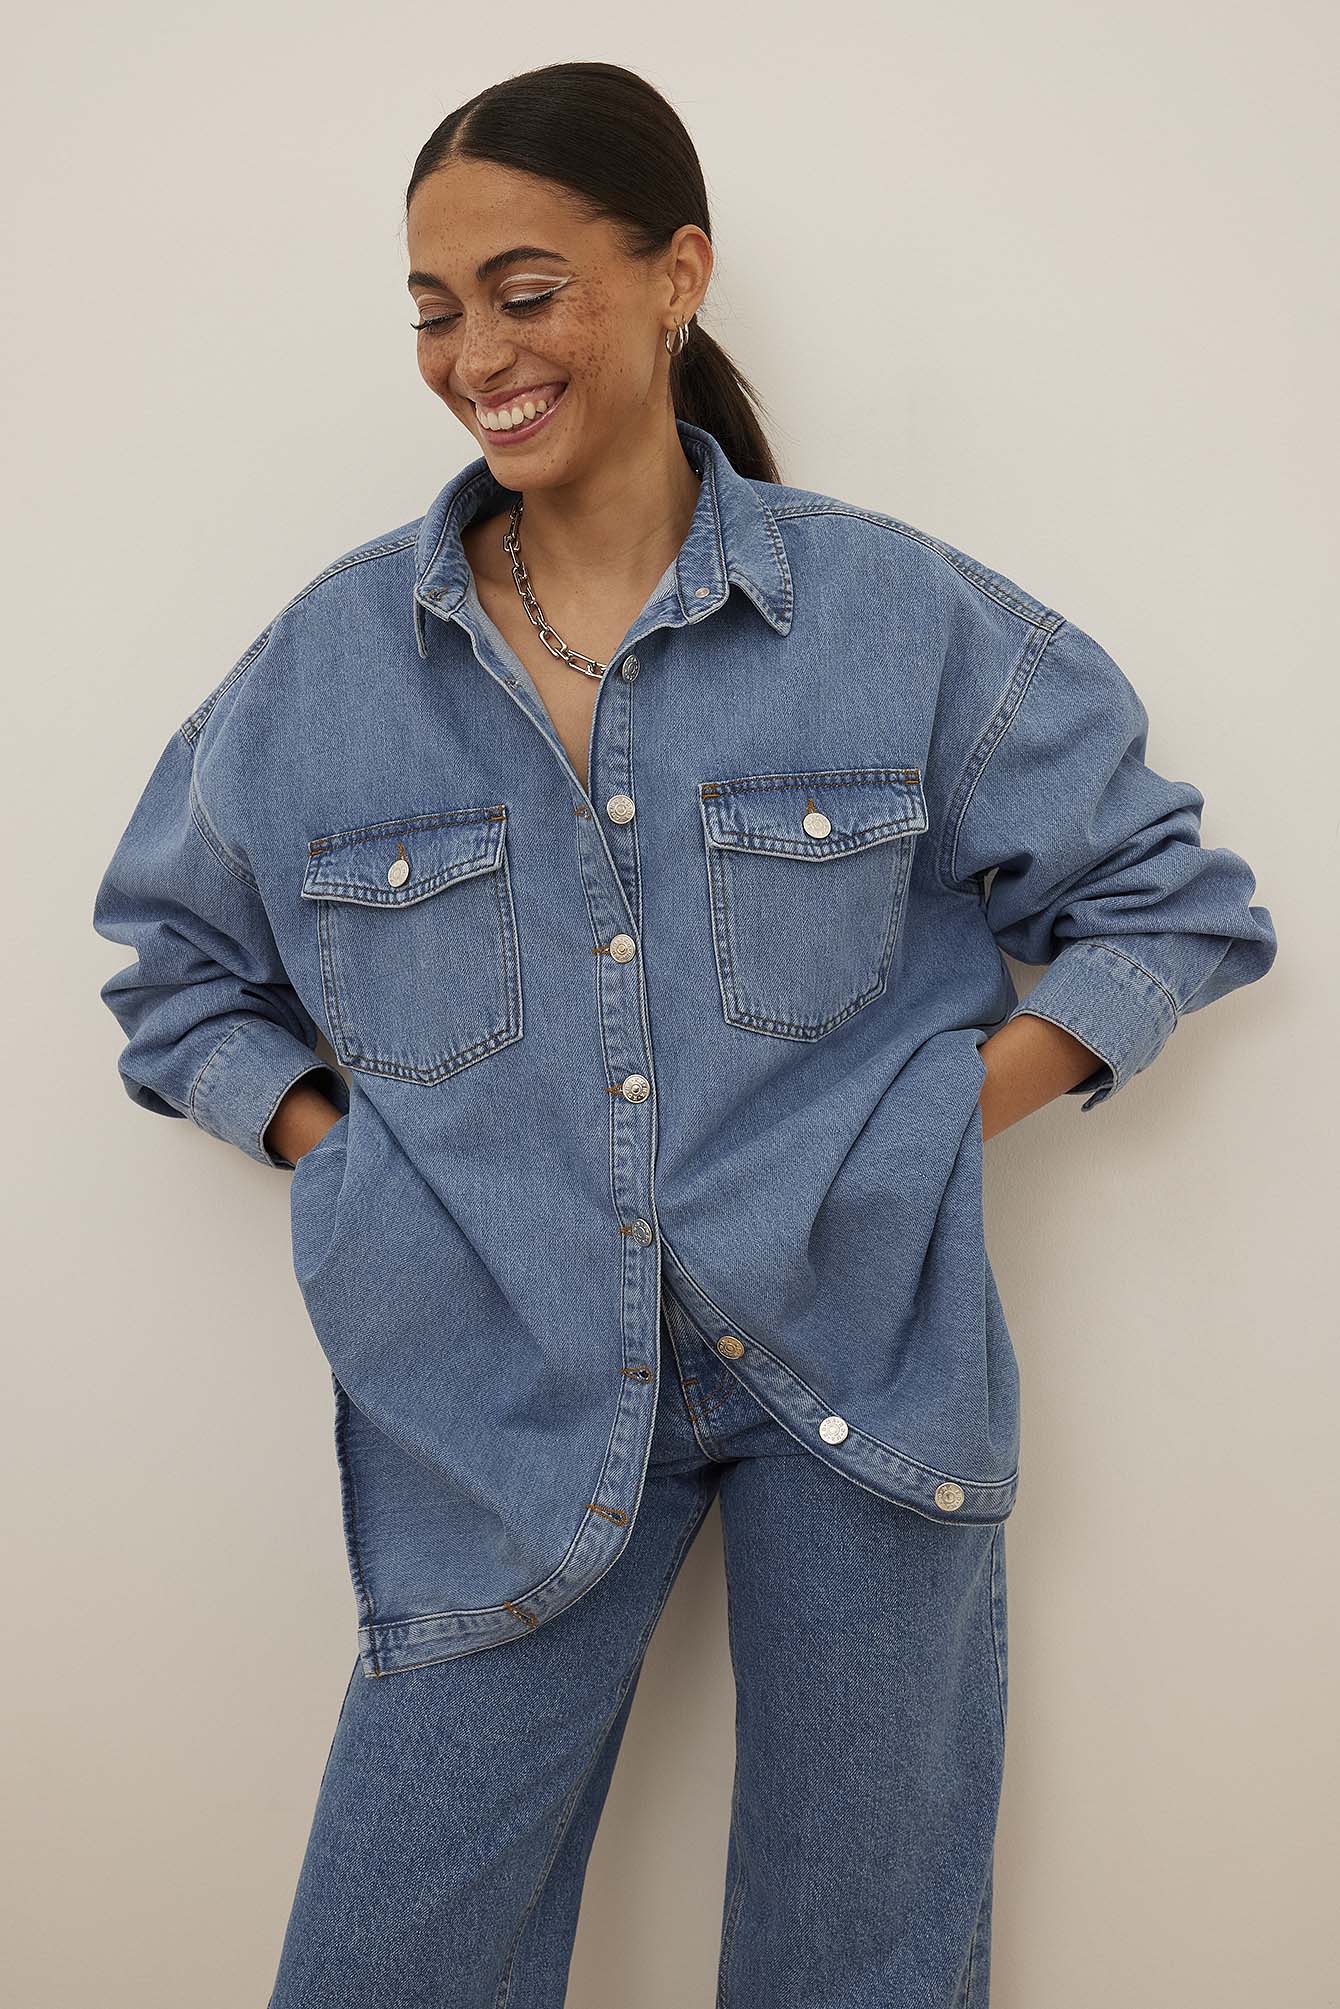 What To Wear With A Denim Shirt: 6 Style Tips | NA-KD